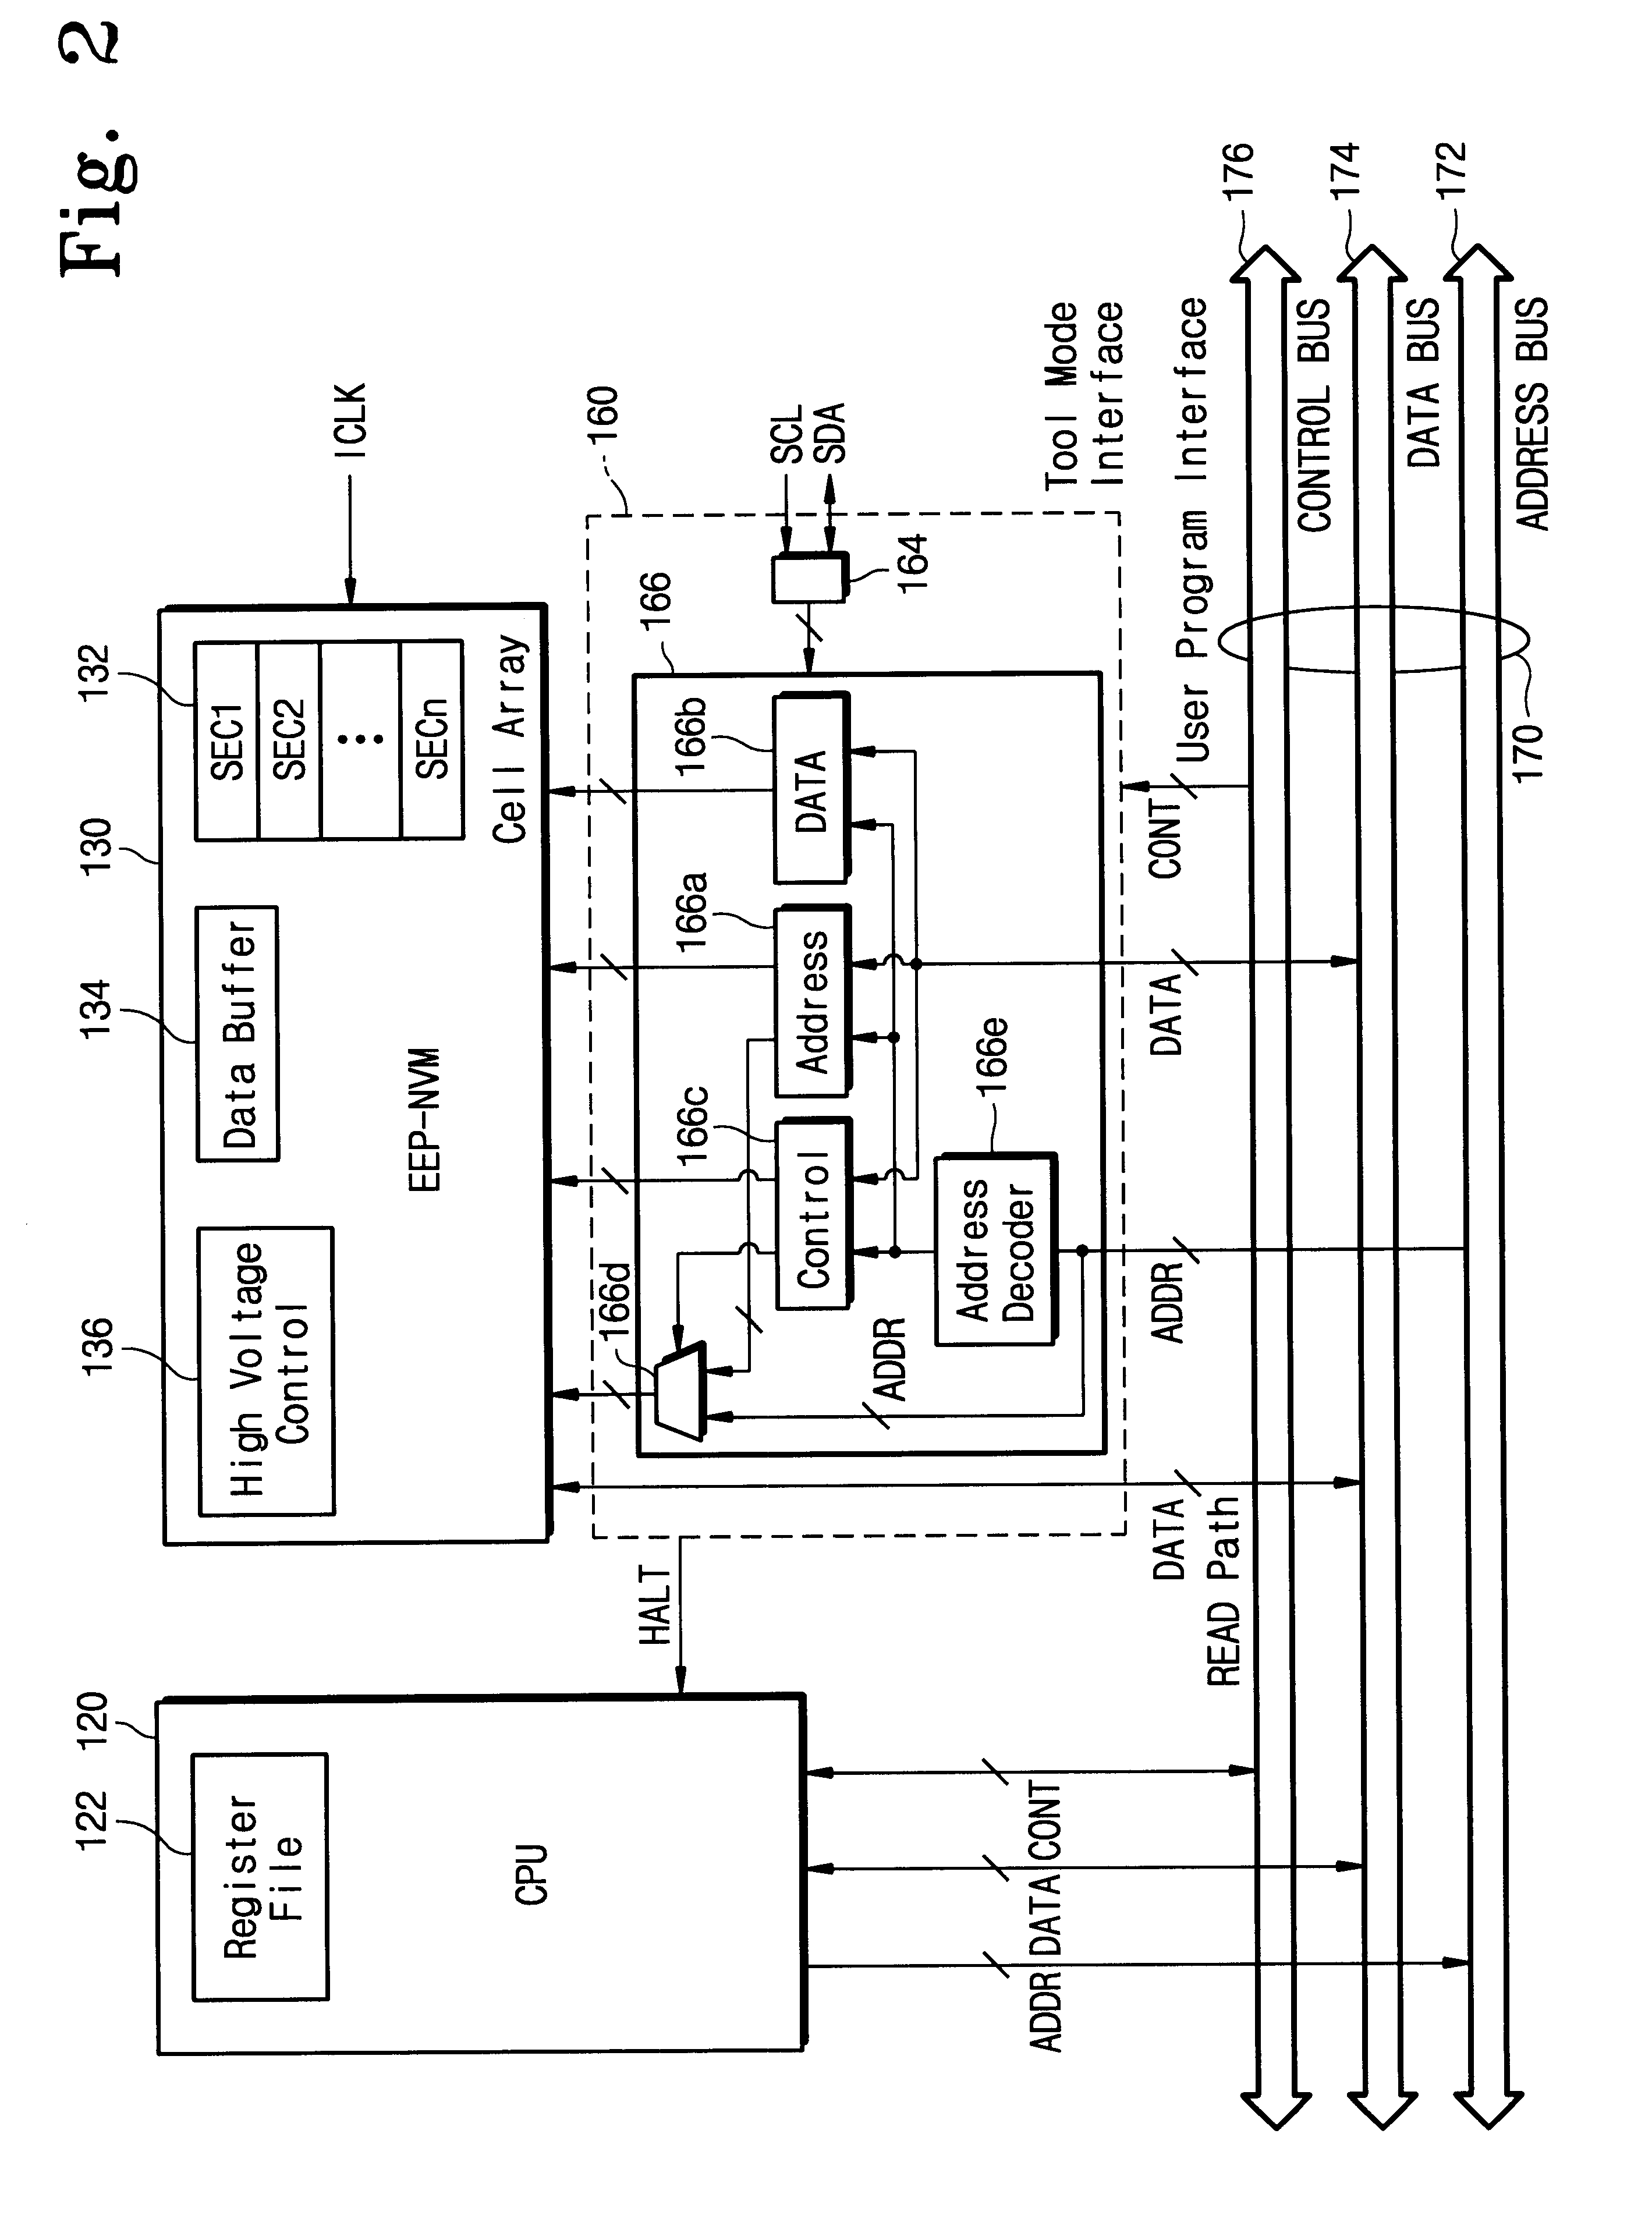 Single-chip data processing apparatus incorporating an electrically rewritable nonvolatile memory and method of operating the same